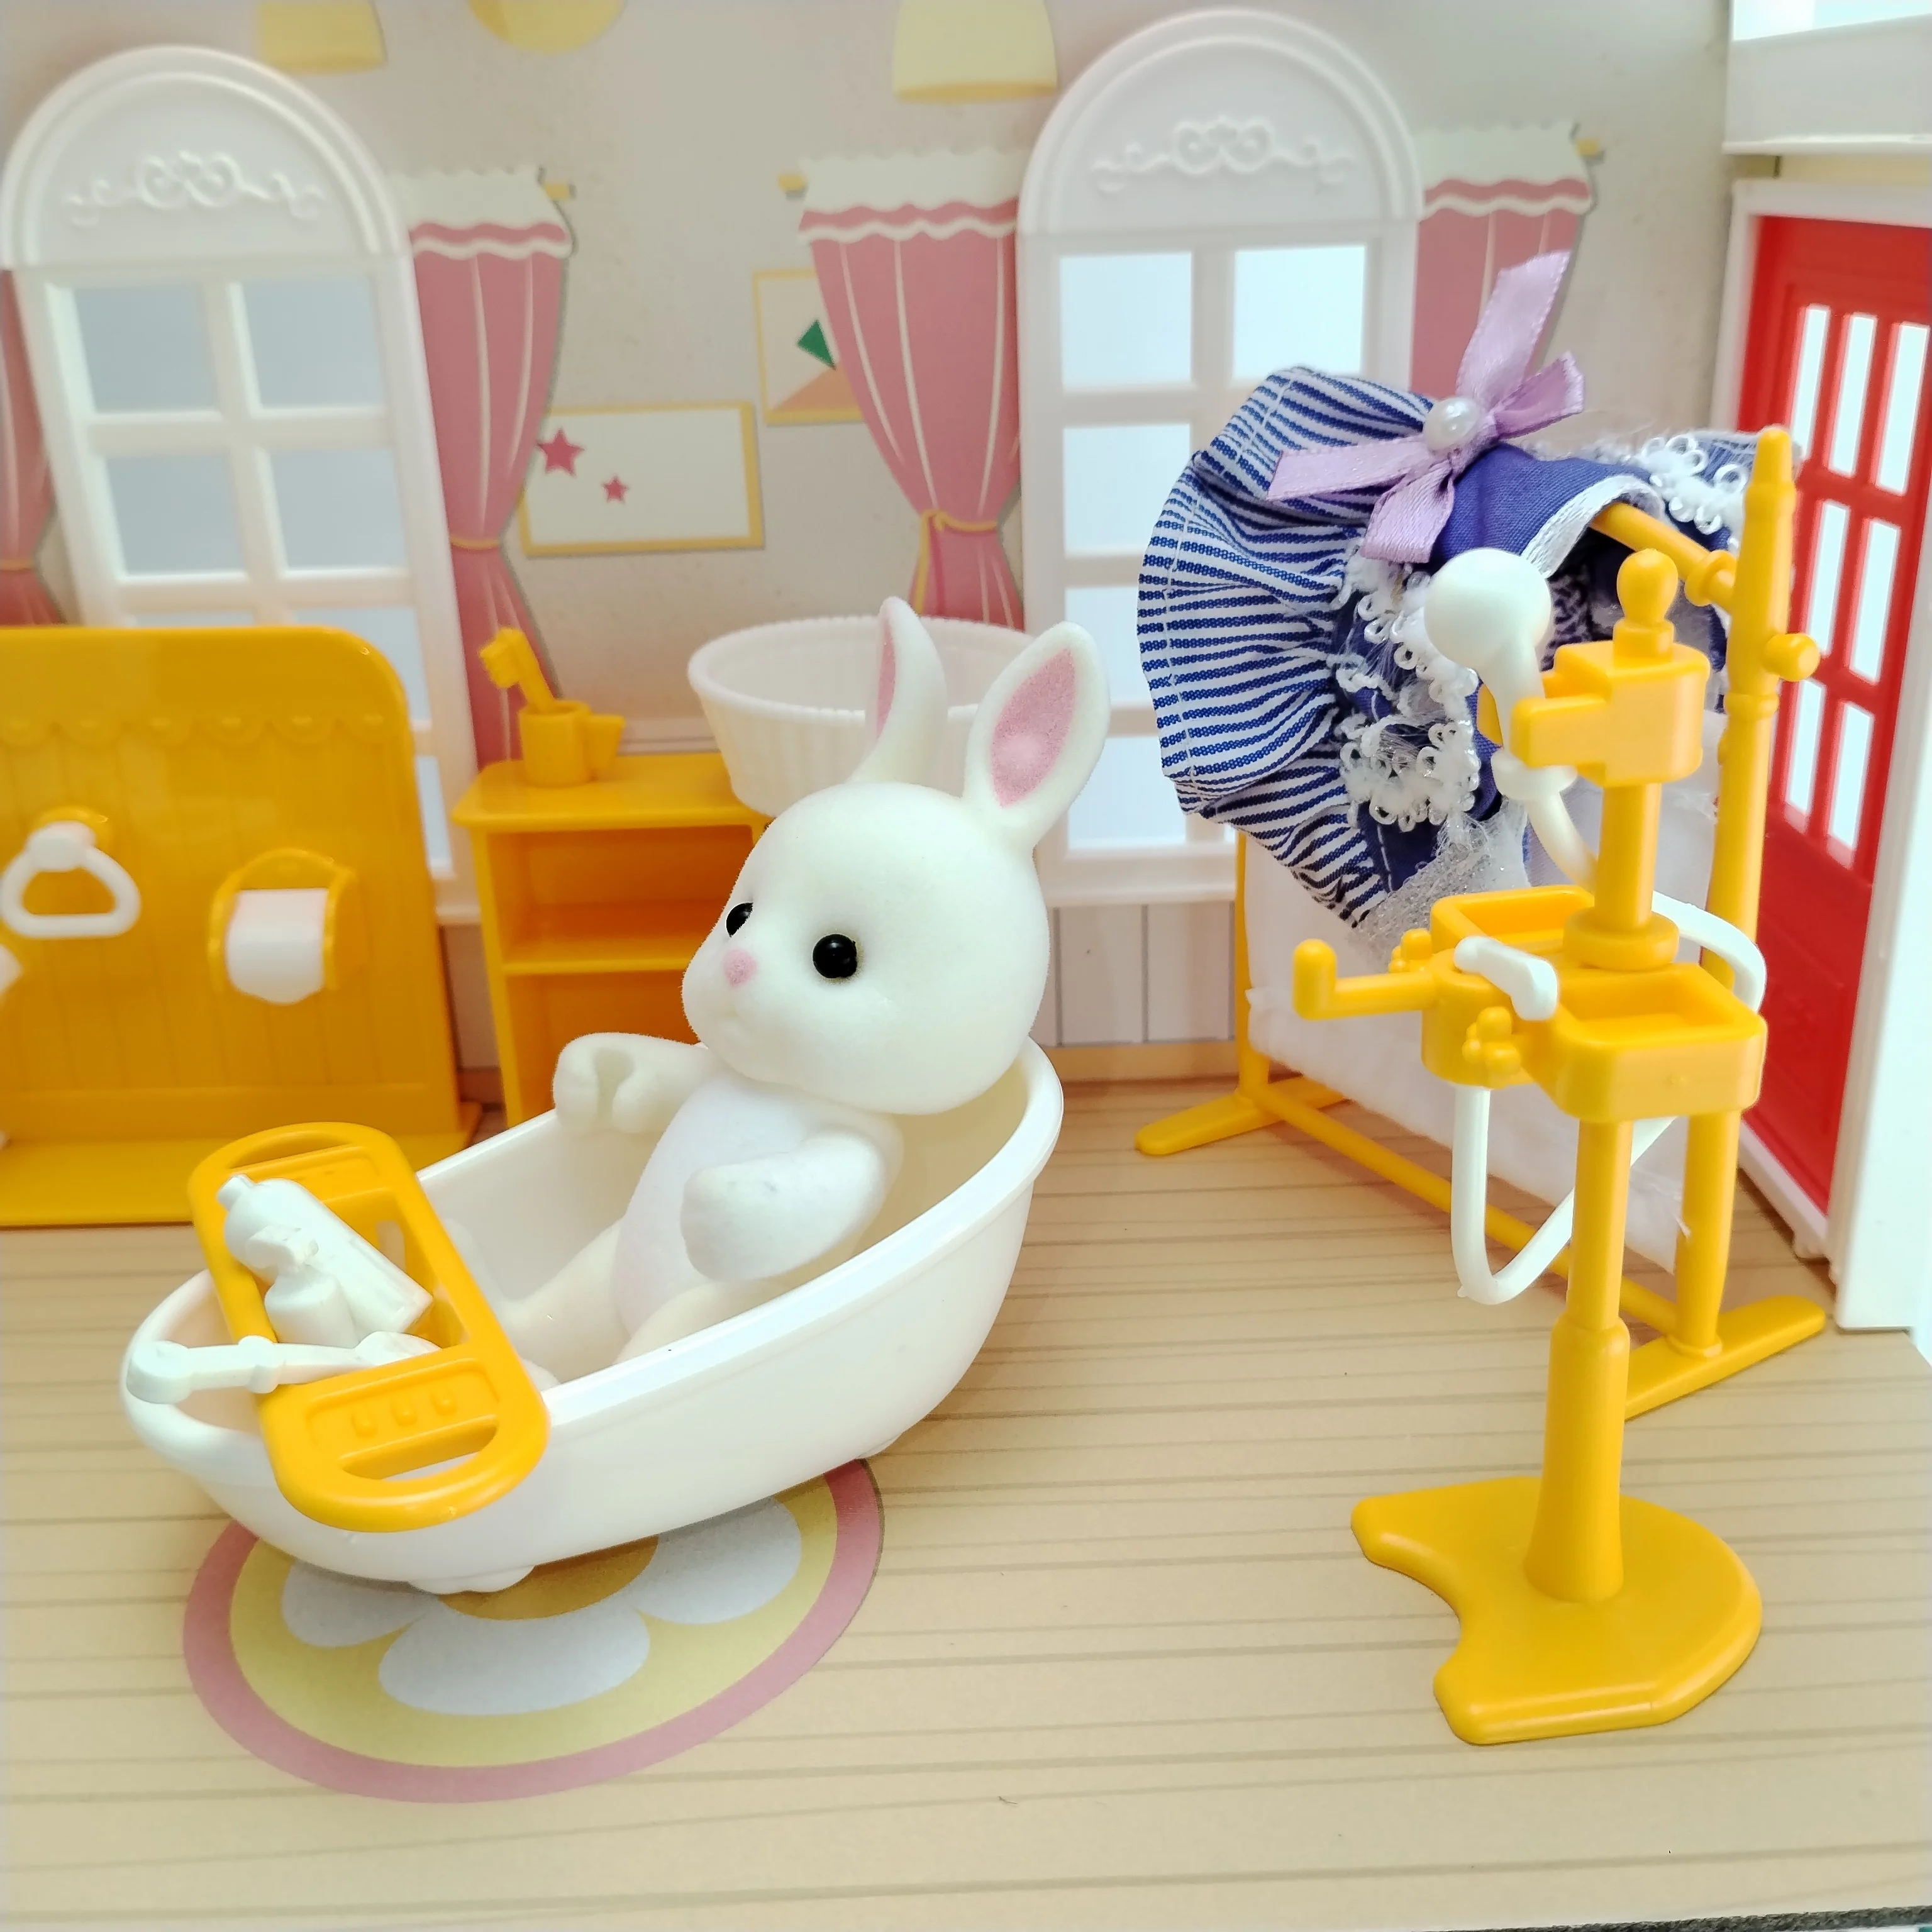 

Original Miniature Items Doll House Accessories And Furniture Family Toys LivingRoom Bathroom Kitchen Toys For Girls Boy